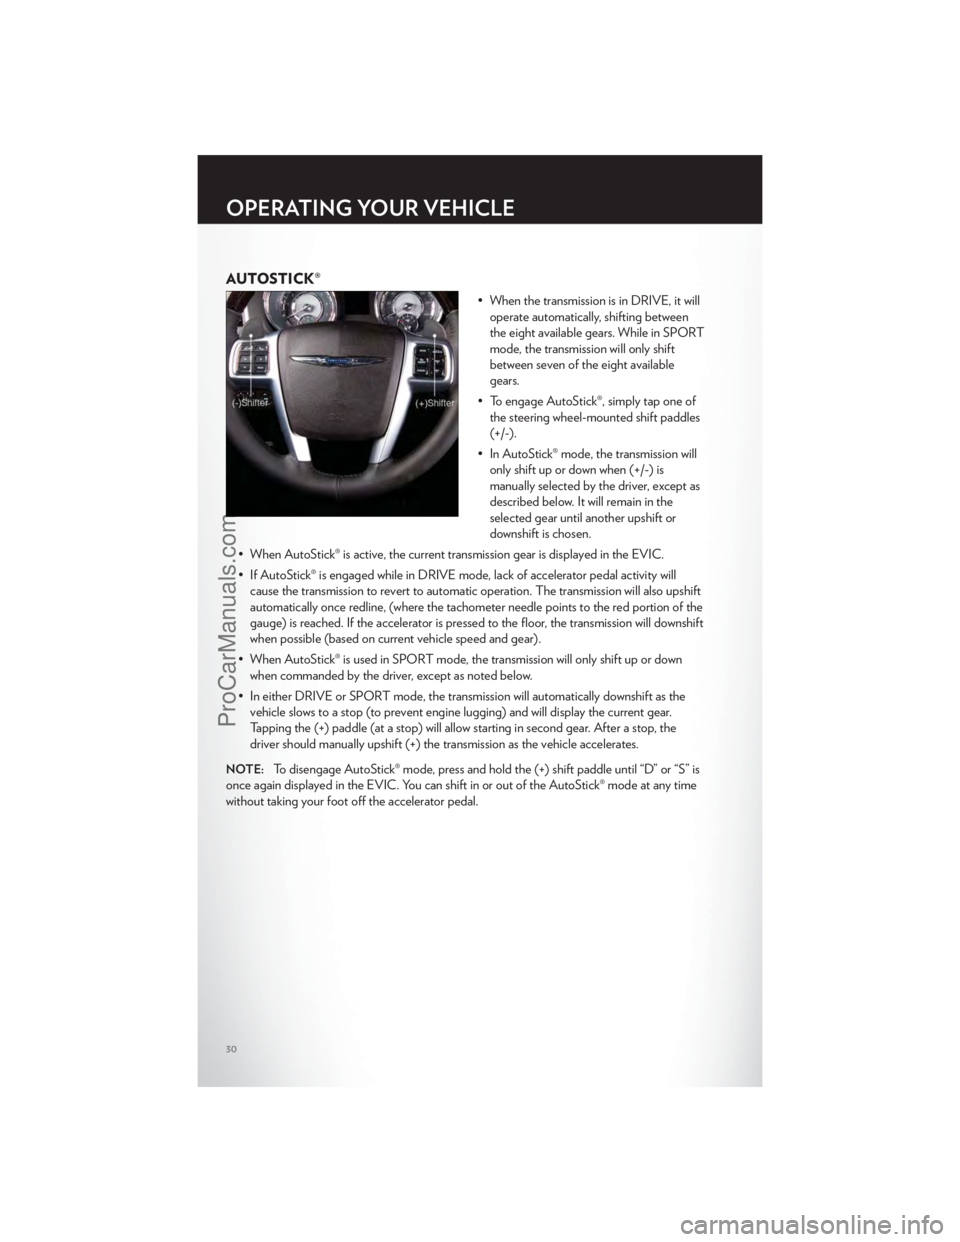 CHRYSLER 300 S 2012  Owners Manual AUTOSTICK®
• When the transmission is in DRIVE, it willoperate automatically, shifting between
the eight available gears. While in SPORT
mode, the transmission will only shift
between seven of the 